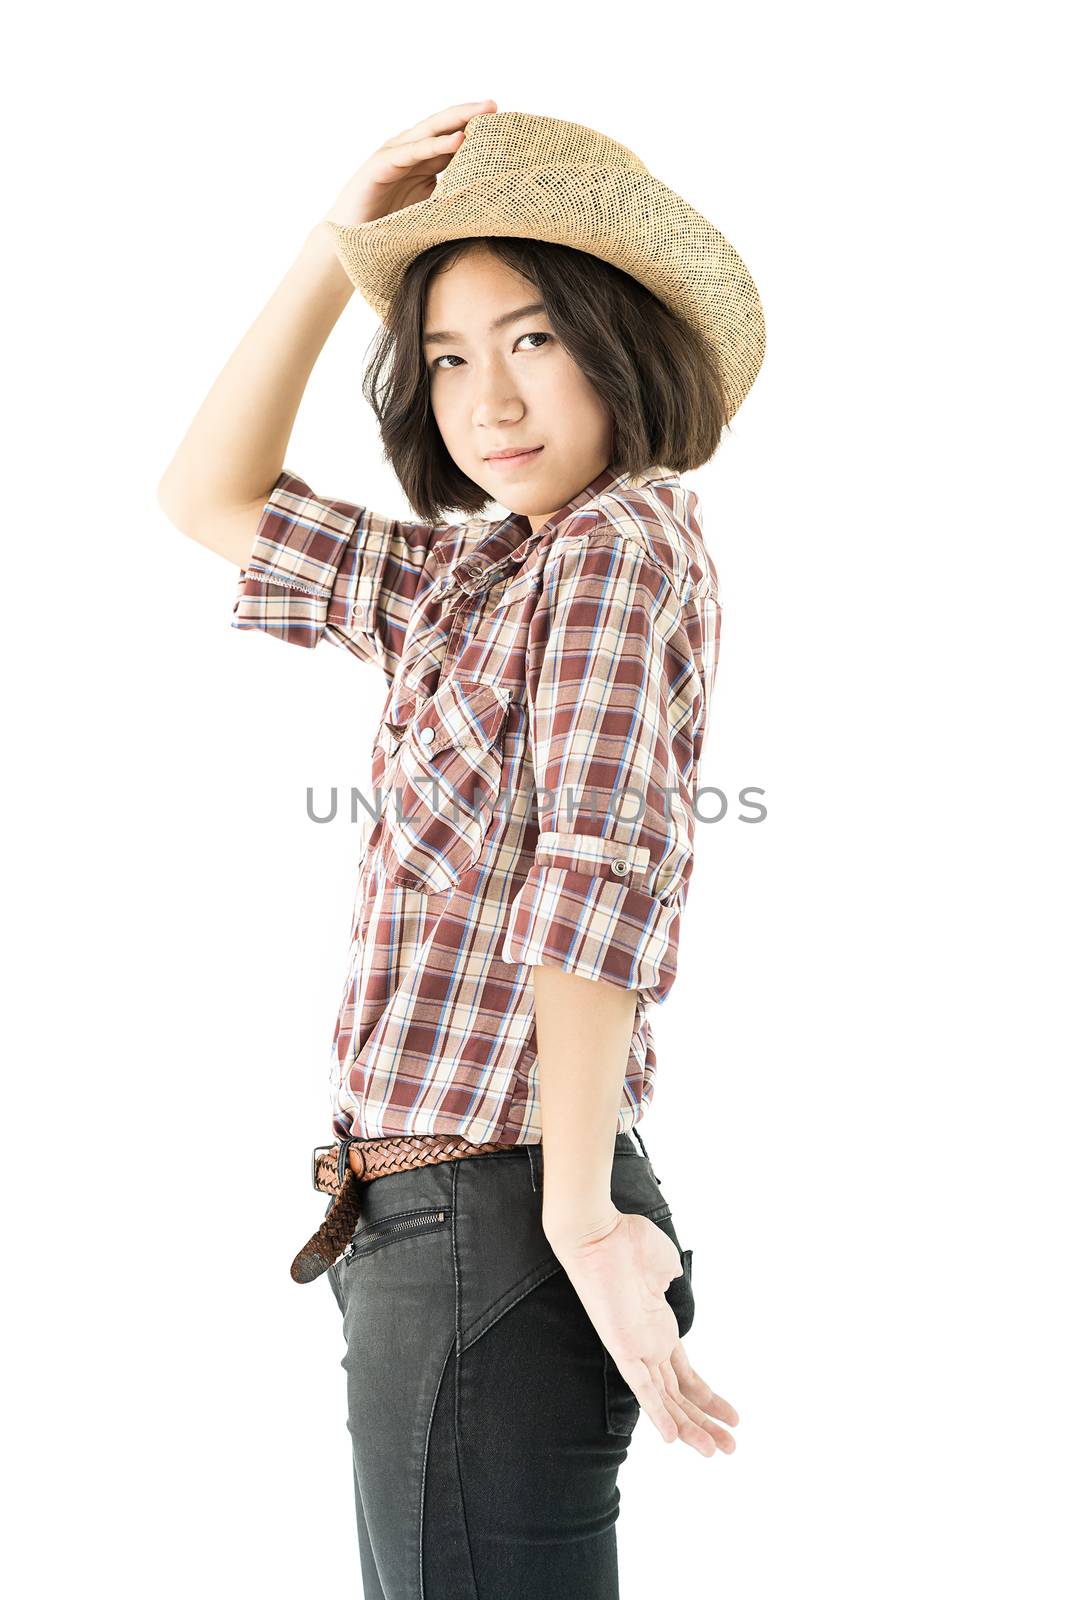 Young pretty woman in a cowboy hat and plaid shirt with hand on her hat isolated on white background